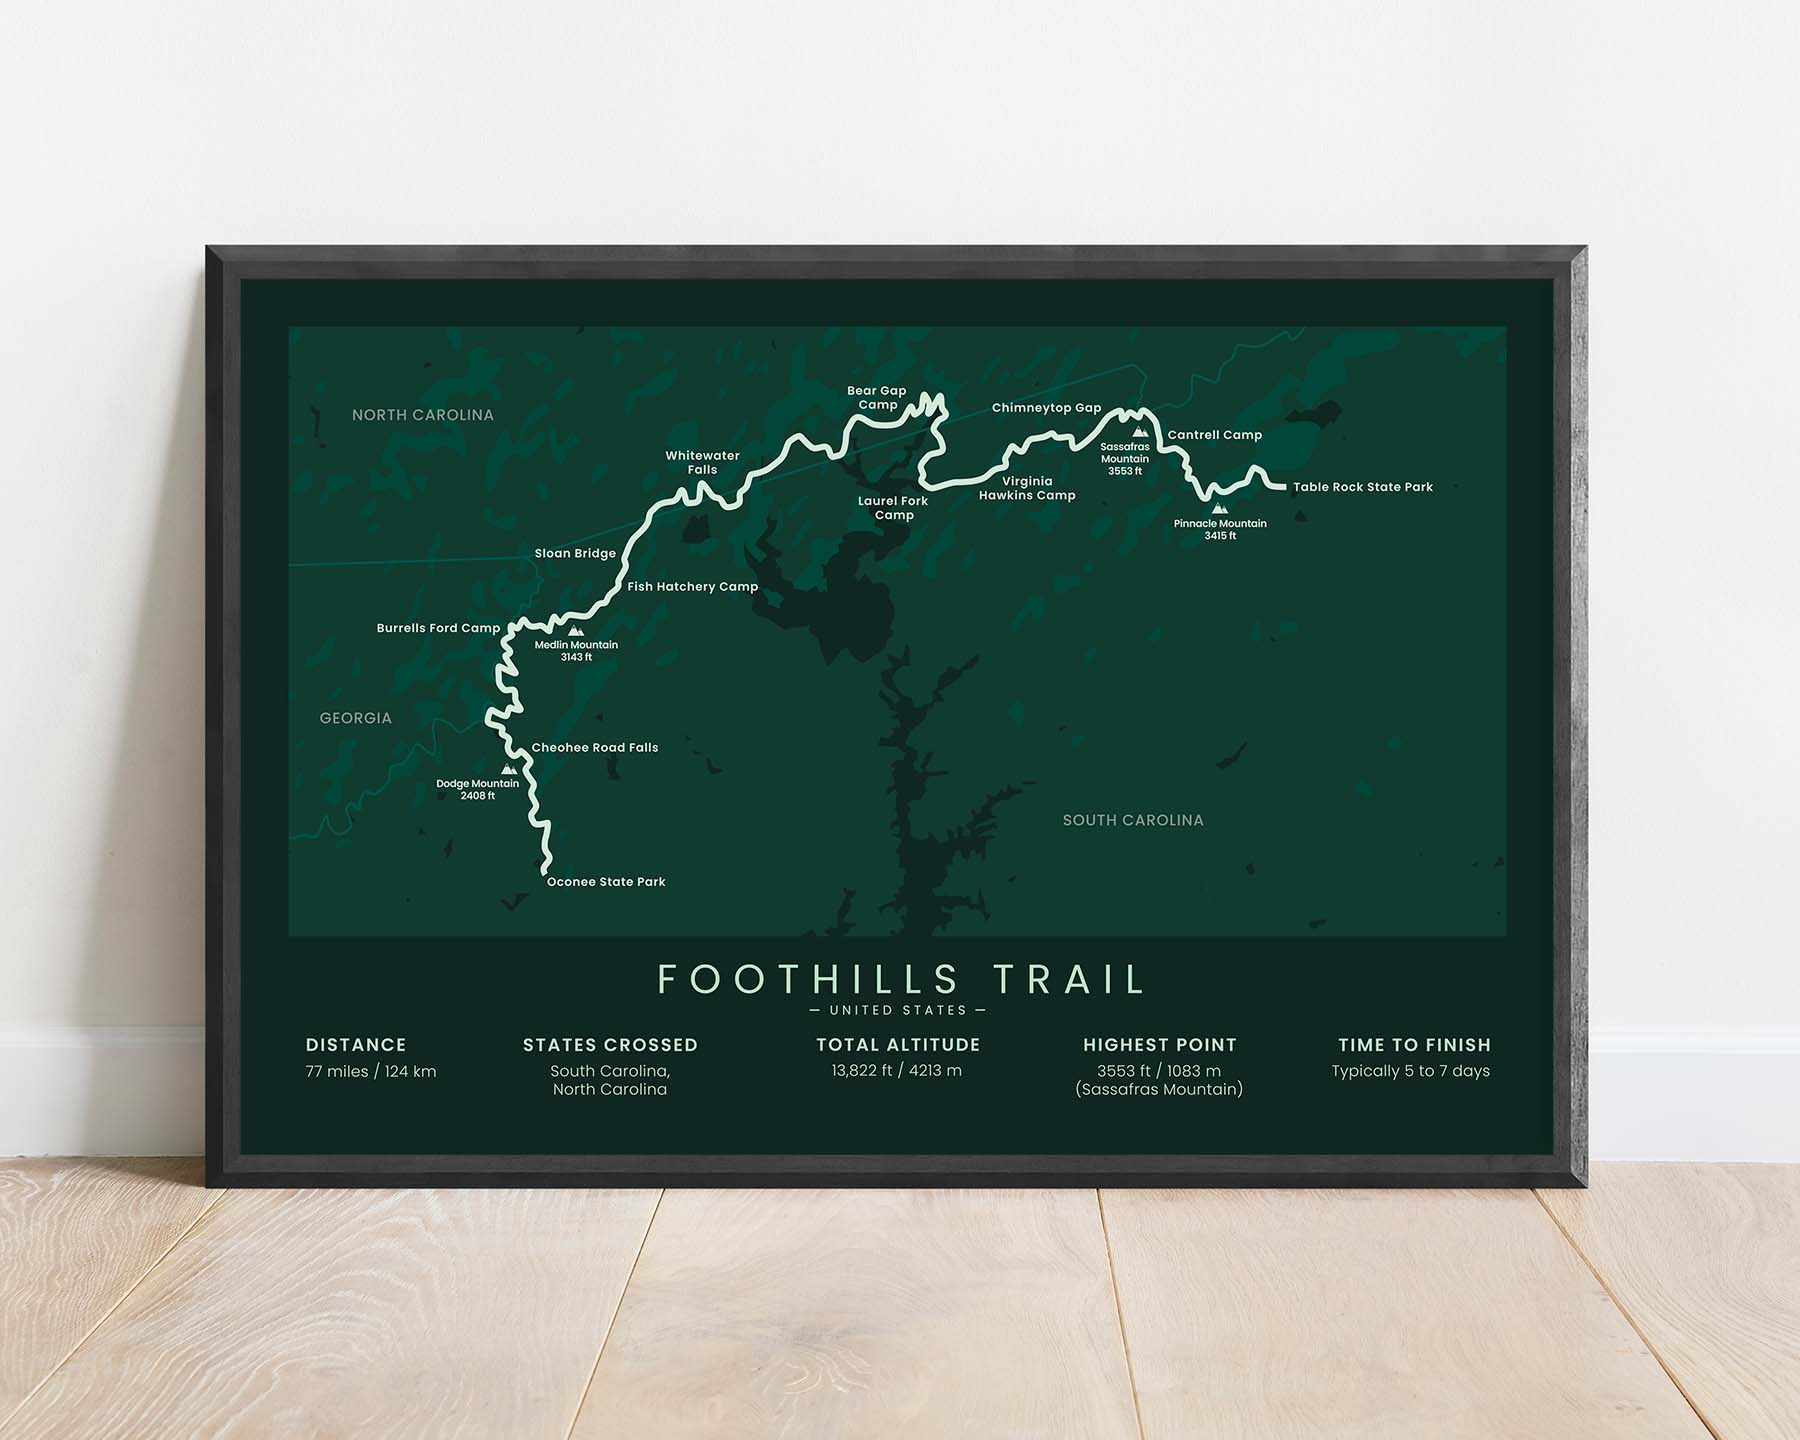 Foothills Trail (Ellicott Rock Wilderness) Path Print with Green Background in Minimal Room Decor